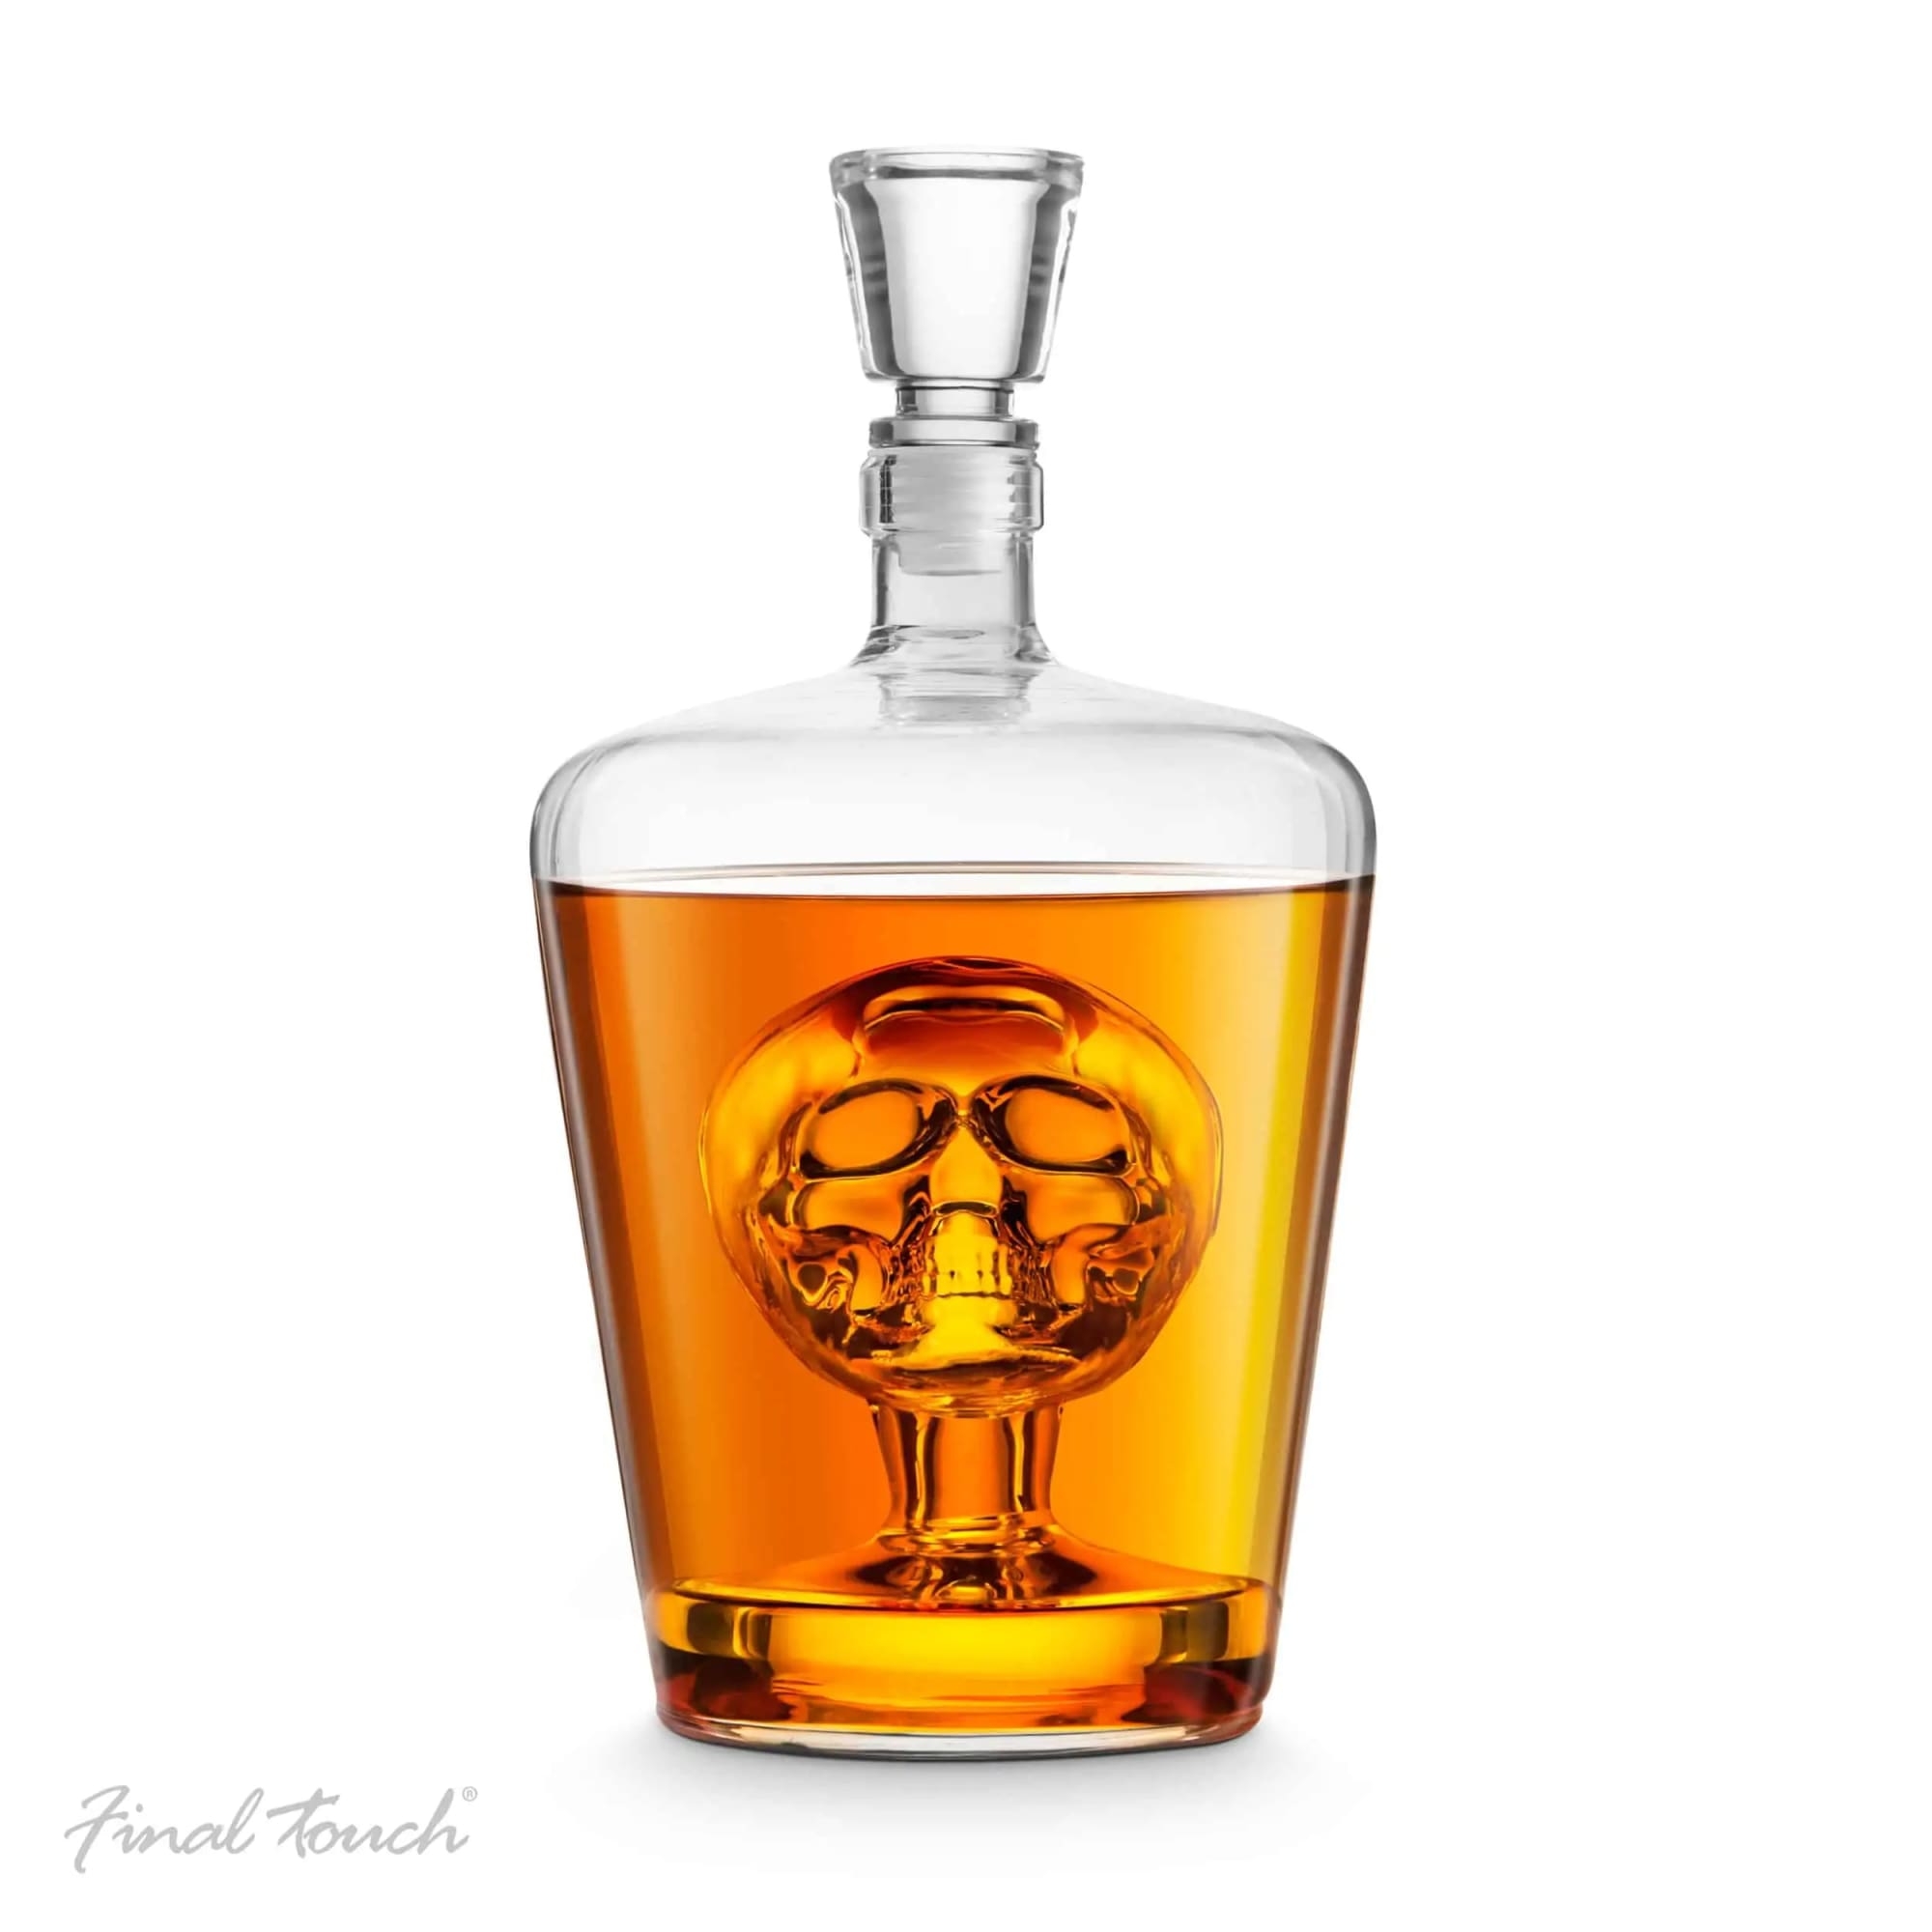 Final Touch Brain Freeze Skull Decanter 1L Image 2